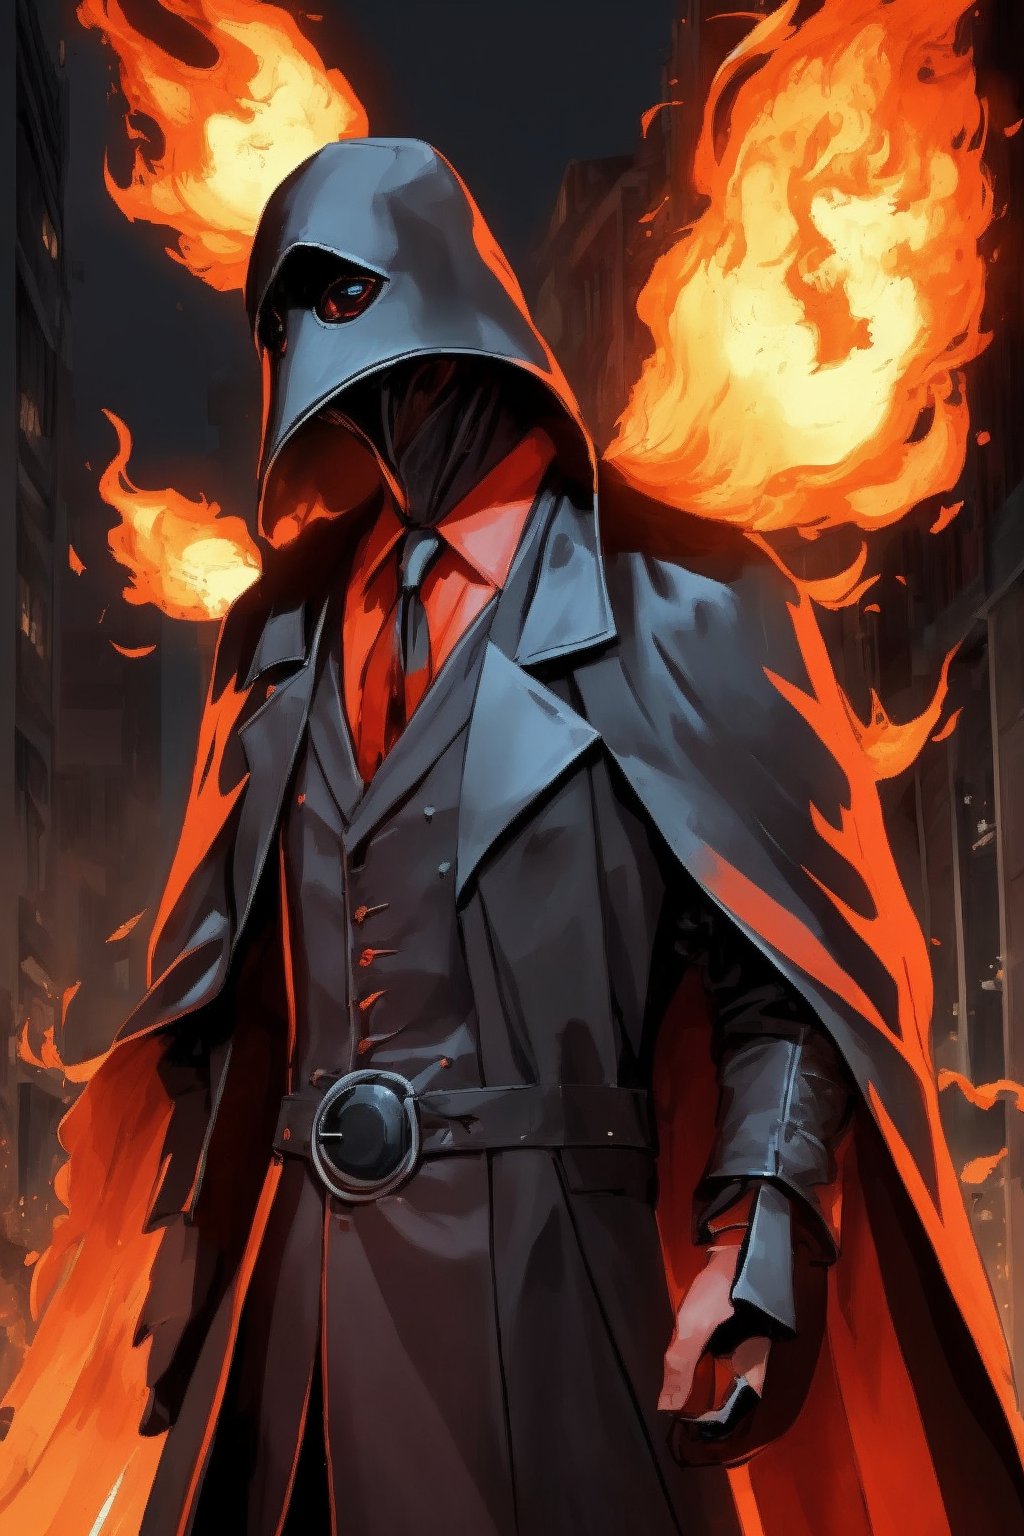 Anime, anime style, 2d, in plague doctor costume shooting fire, 1 young tall and sexy man, dangling red fashion bangs, fiery orangish hair, urban background